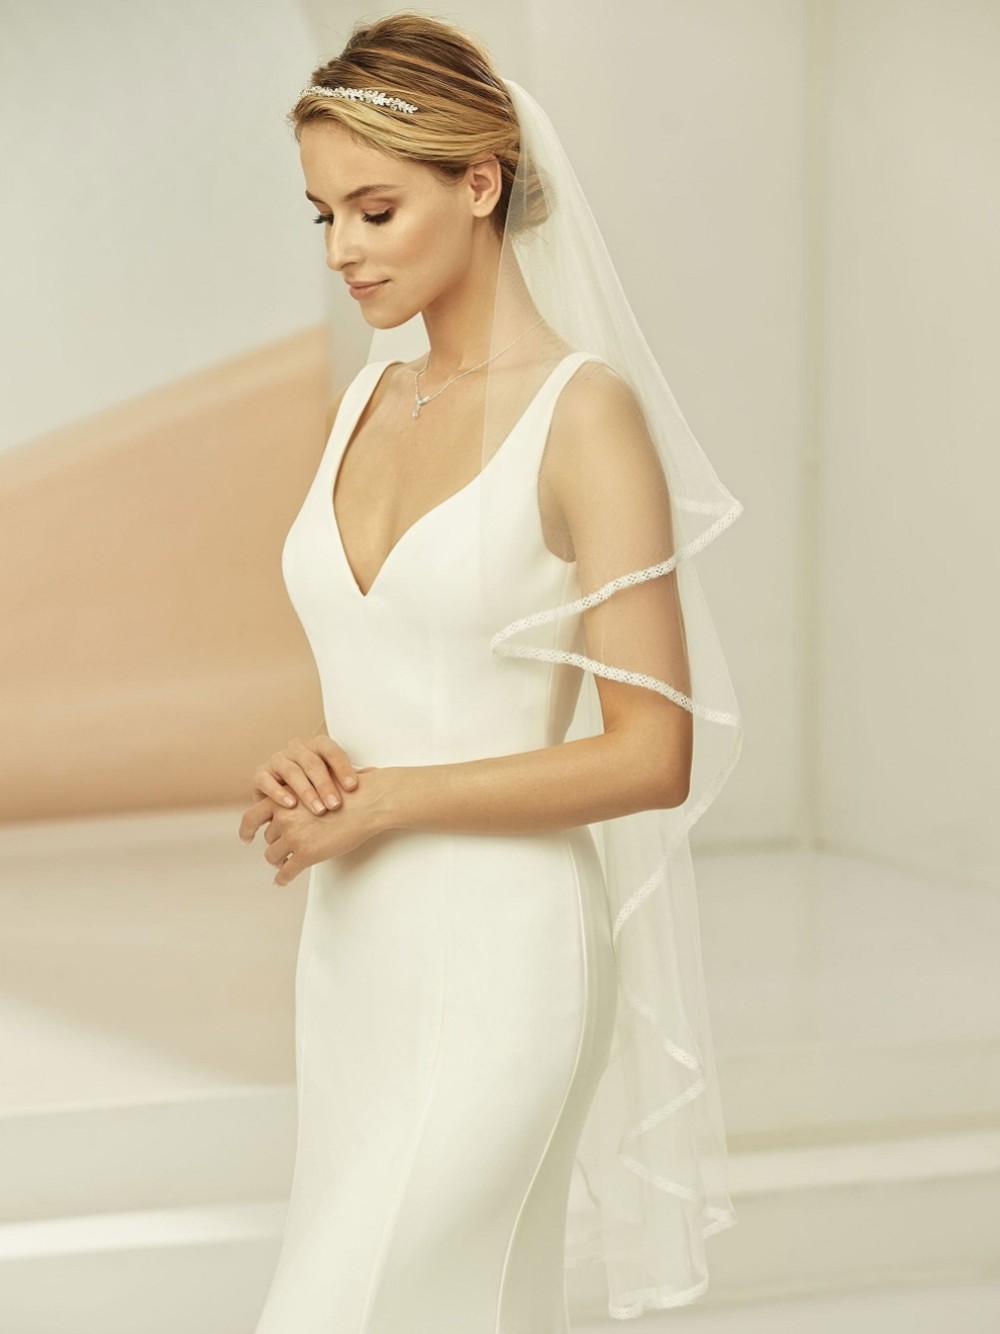 Photograph: Bianco Ivory Waterfall Effect Fingertip Veil with Narrow Lace Edge S365